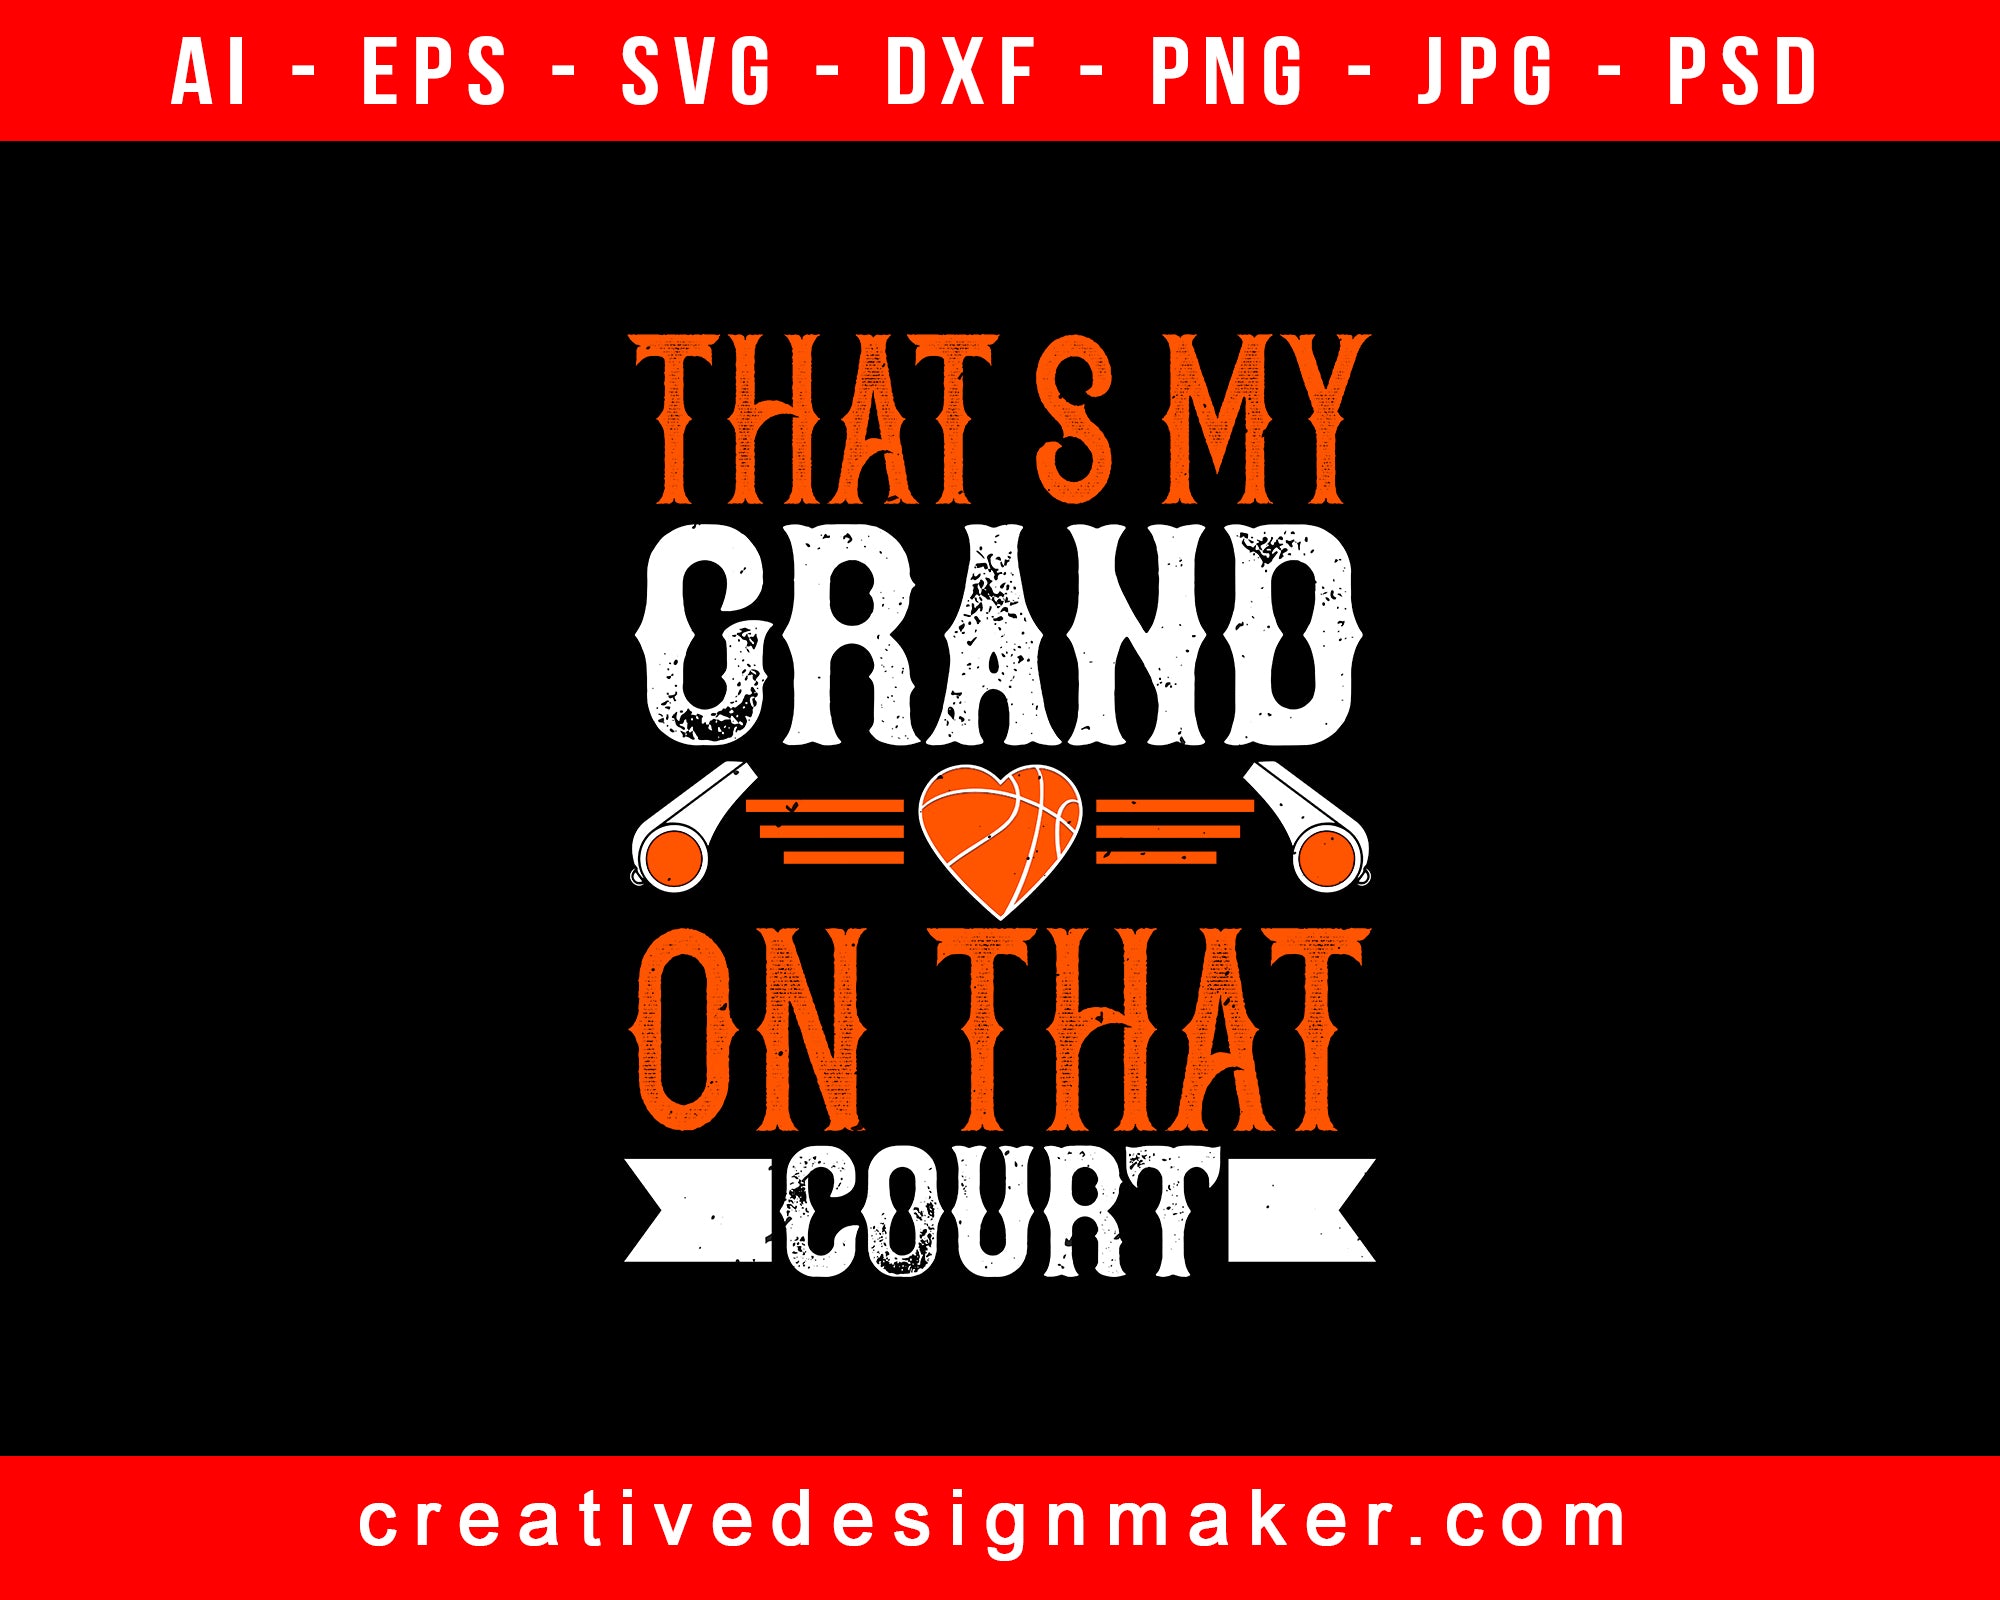 That's My Grand Son On That Court Basketball Print Ready Editable T-Shirt SVG Design!